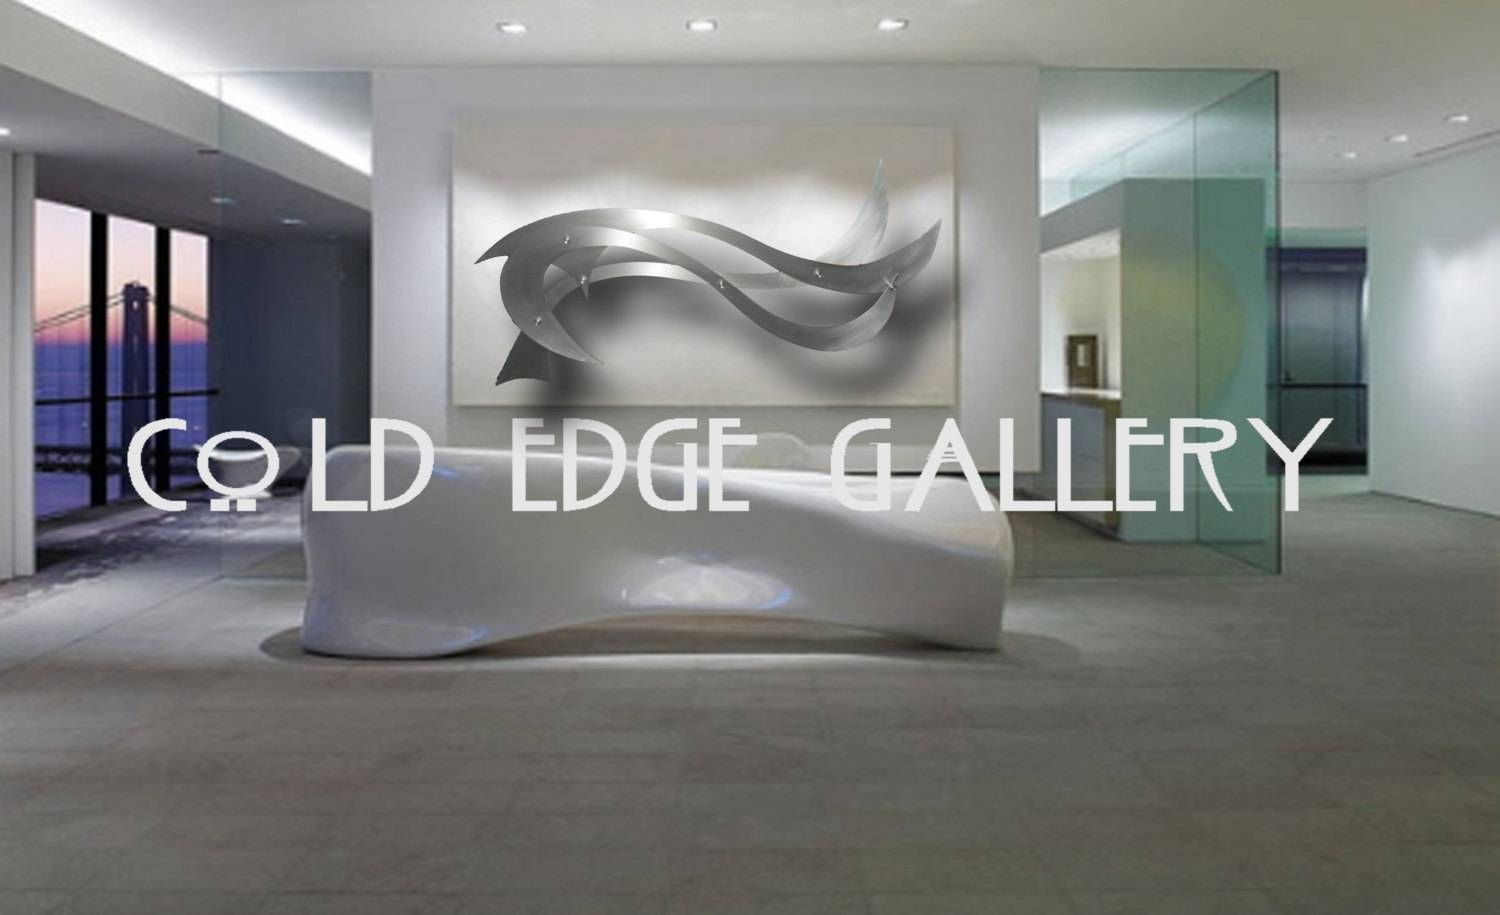 Large Metal Wall Art Corporate Wall Art Extra Large Wall For Best And Newest Large Contemporary Wall Art (View 1 of 20)